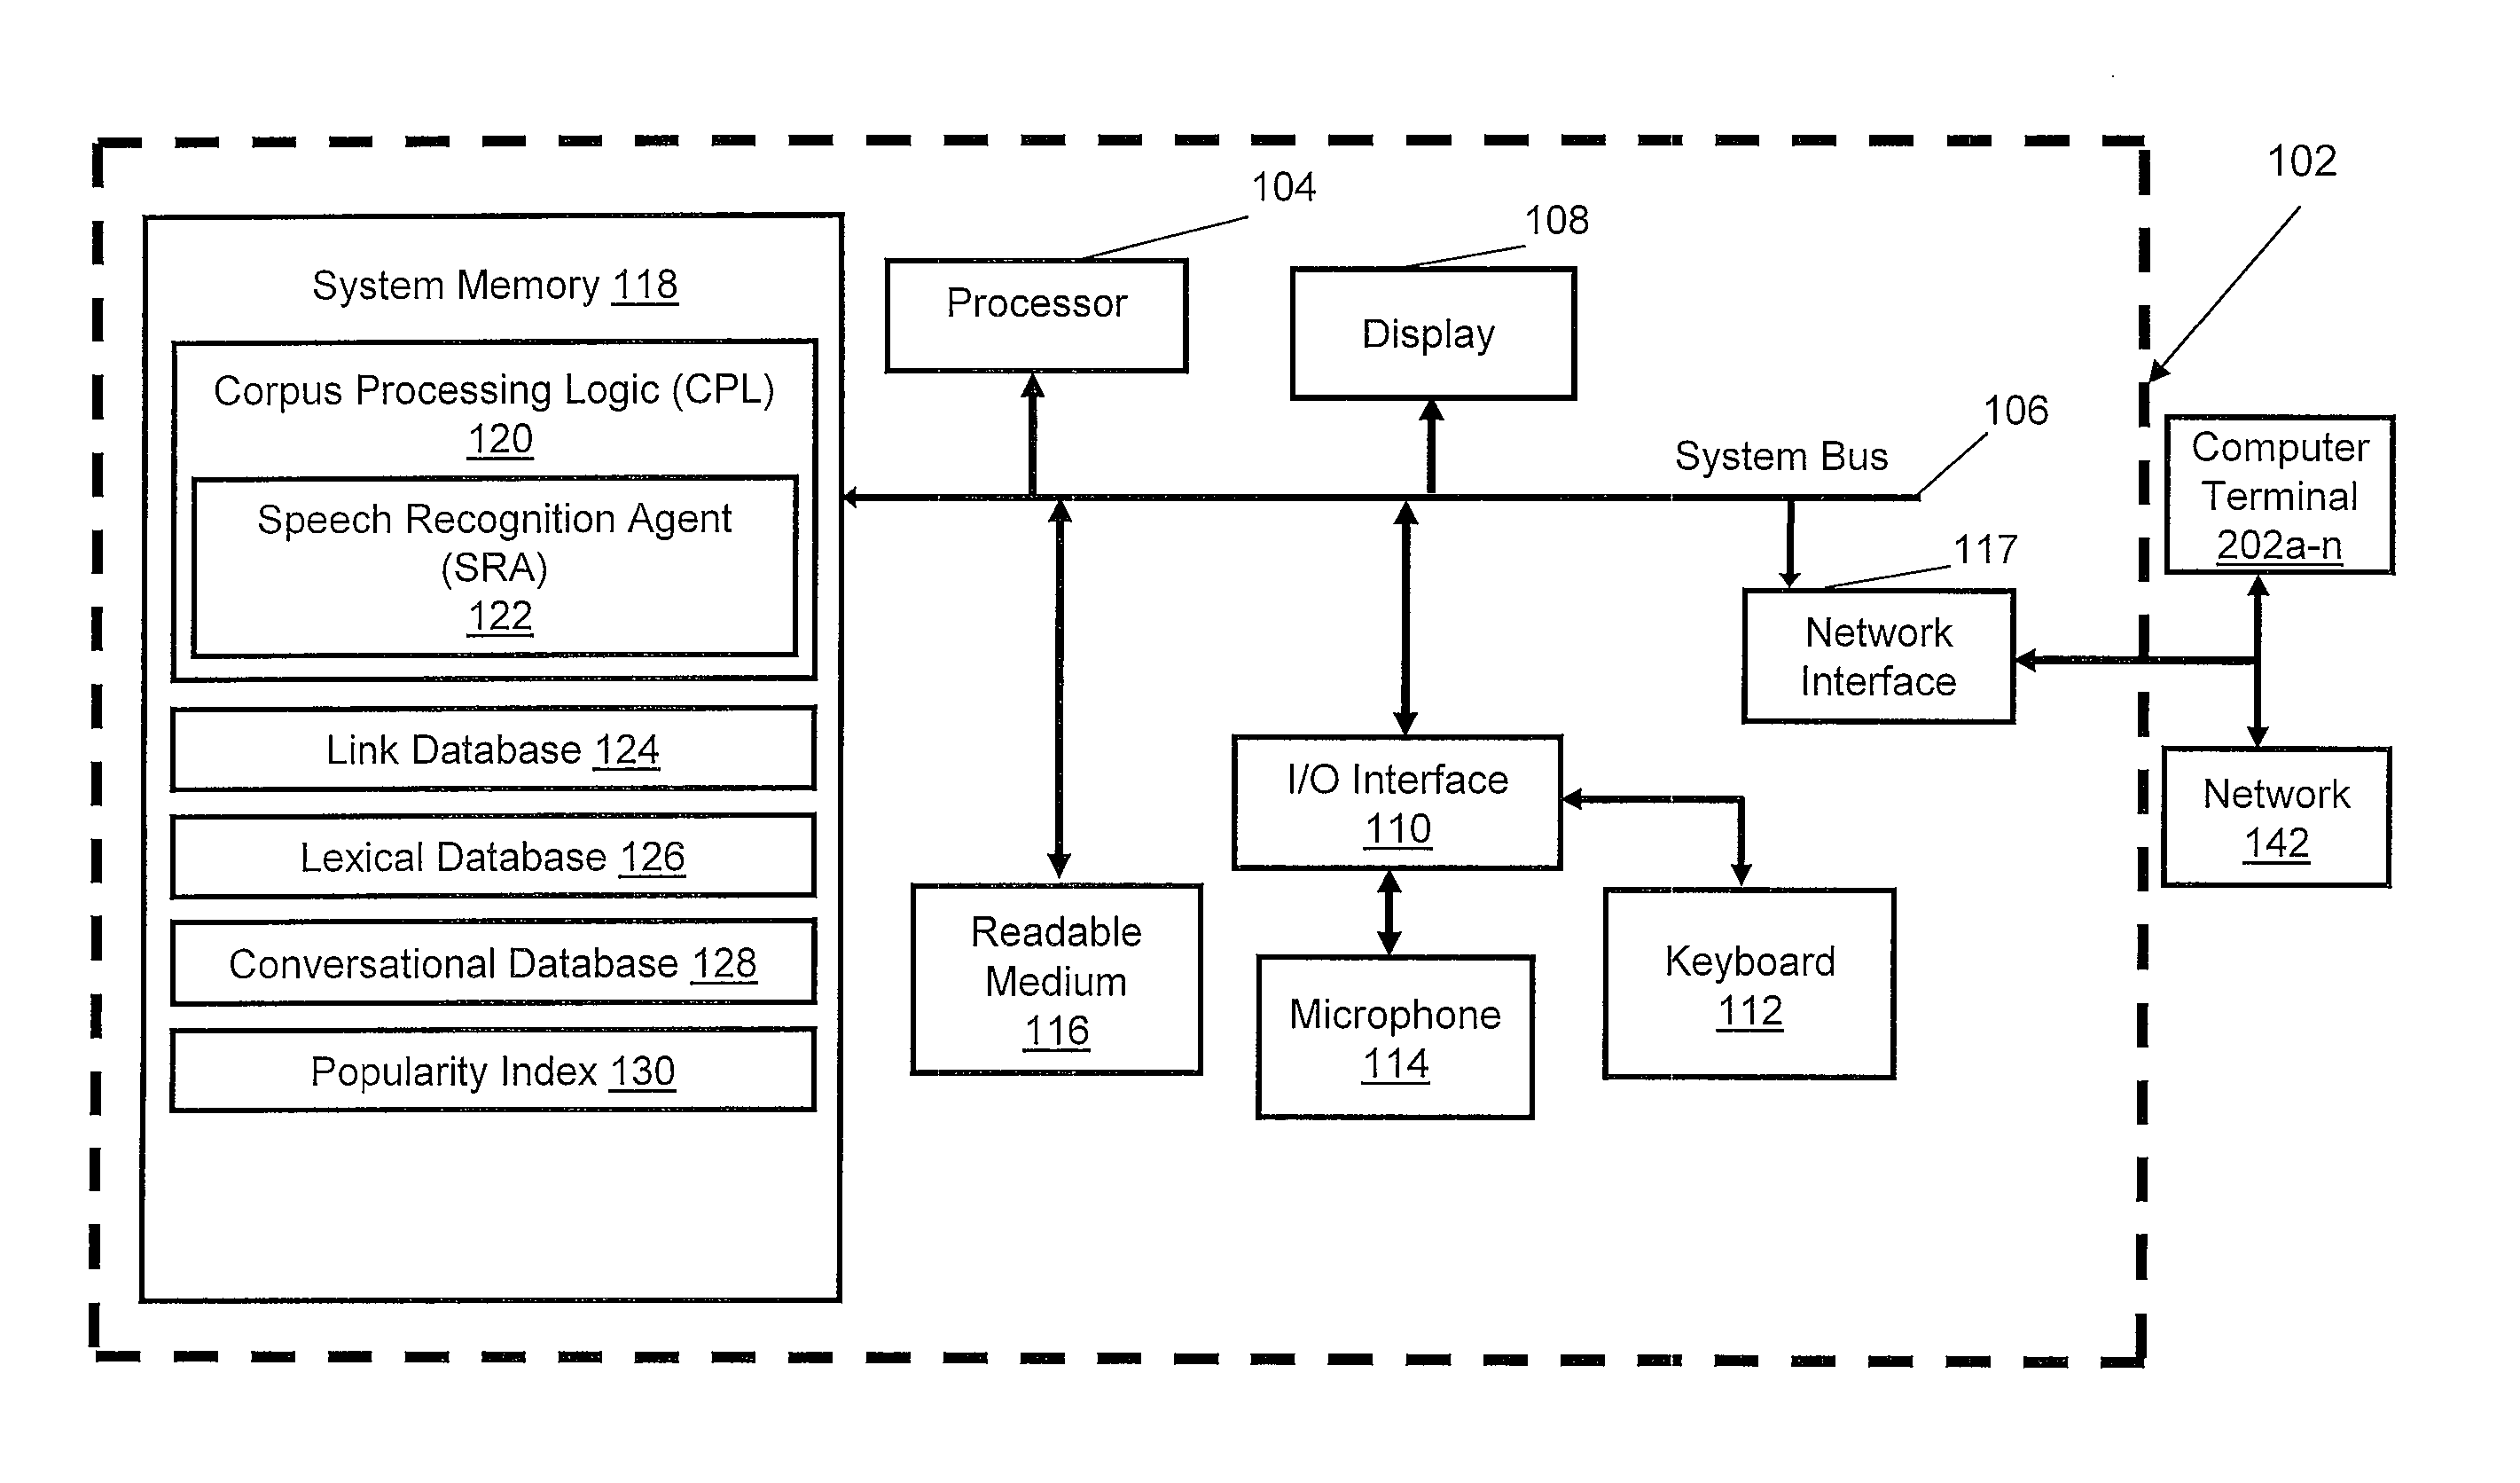 Data processing system for autonomously building speech identification and tagging data